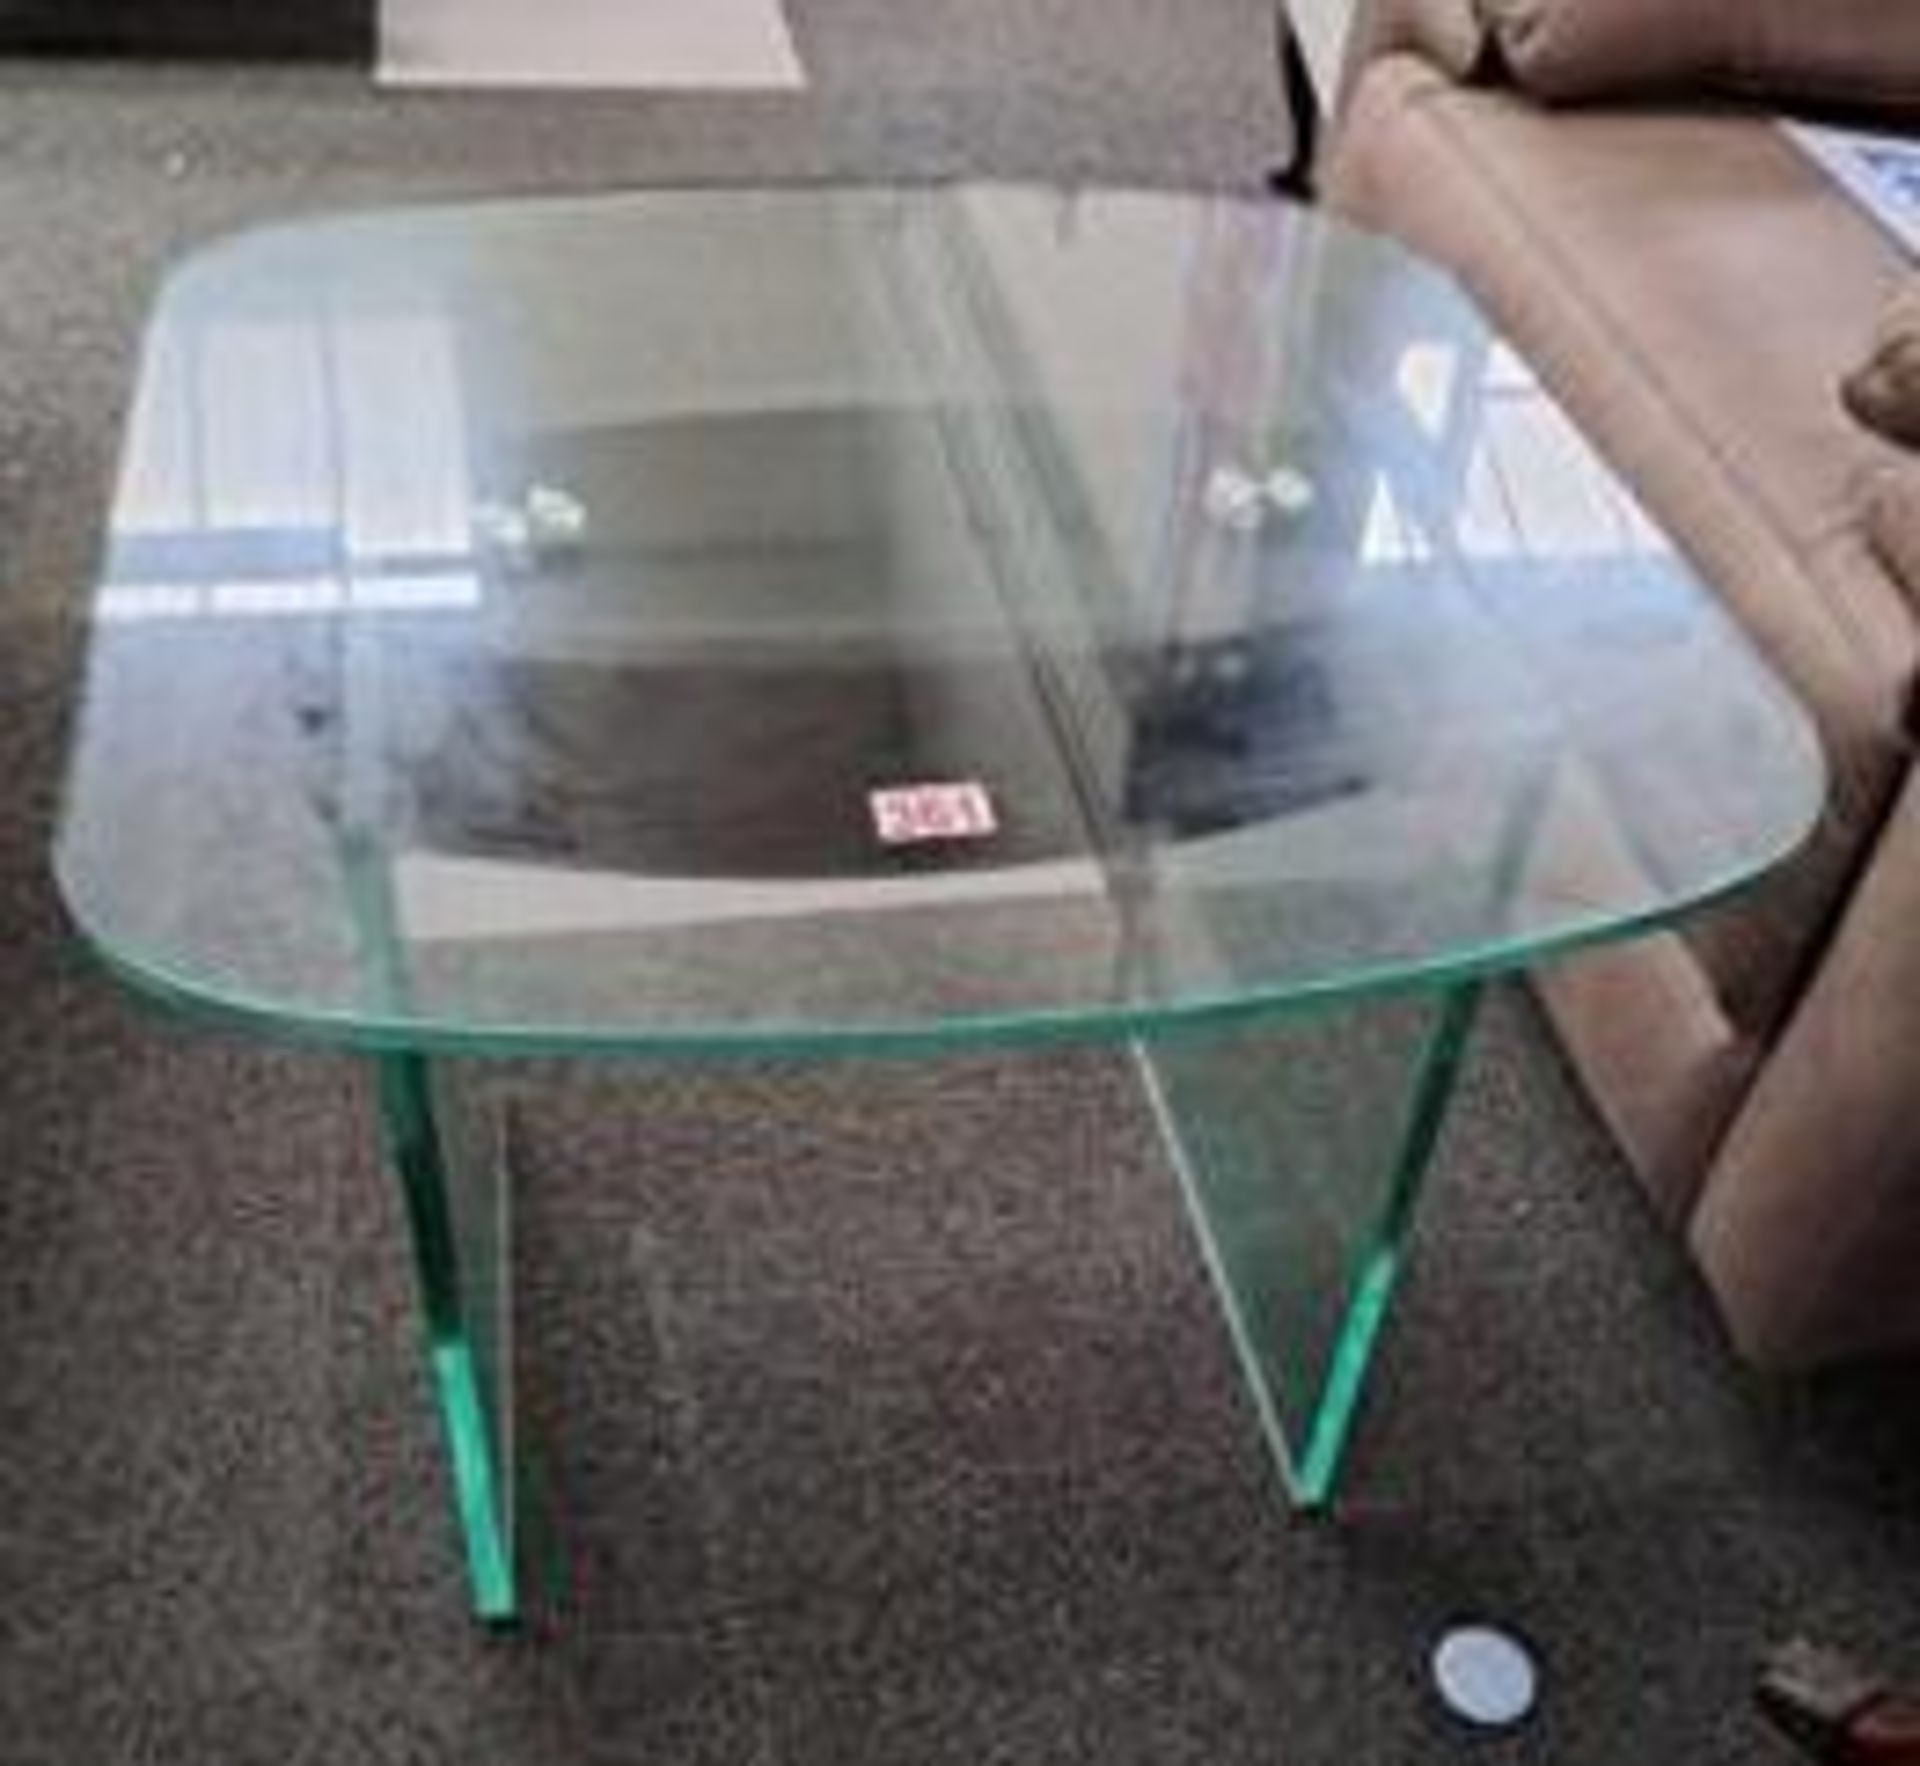 *EX DISPLAY* Tempered glass lamp table.